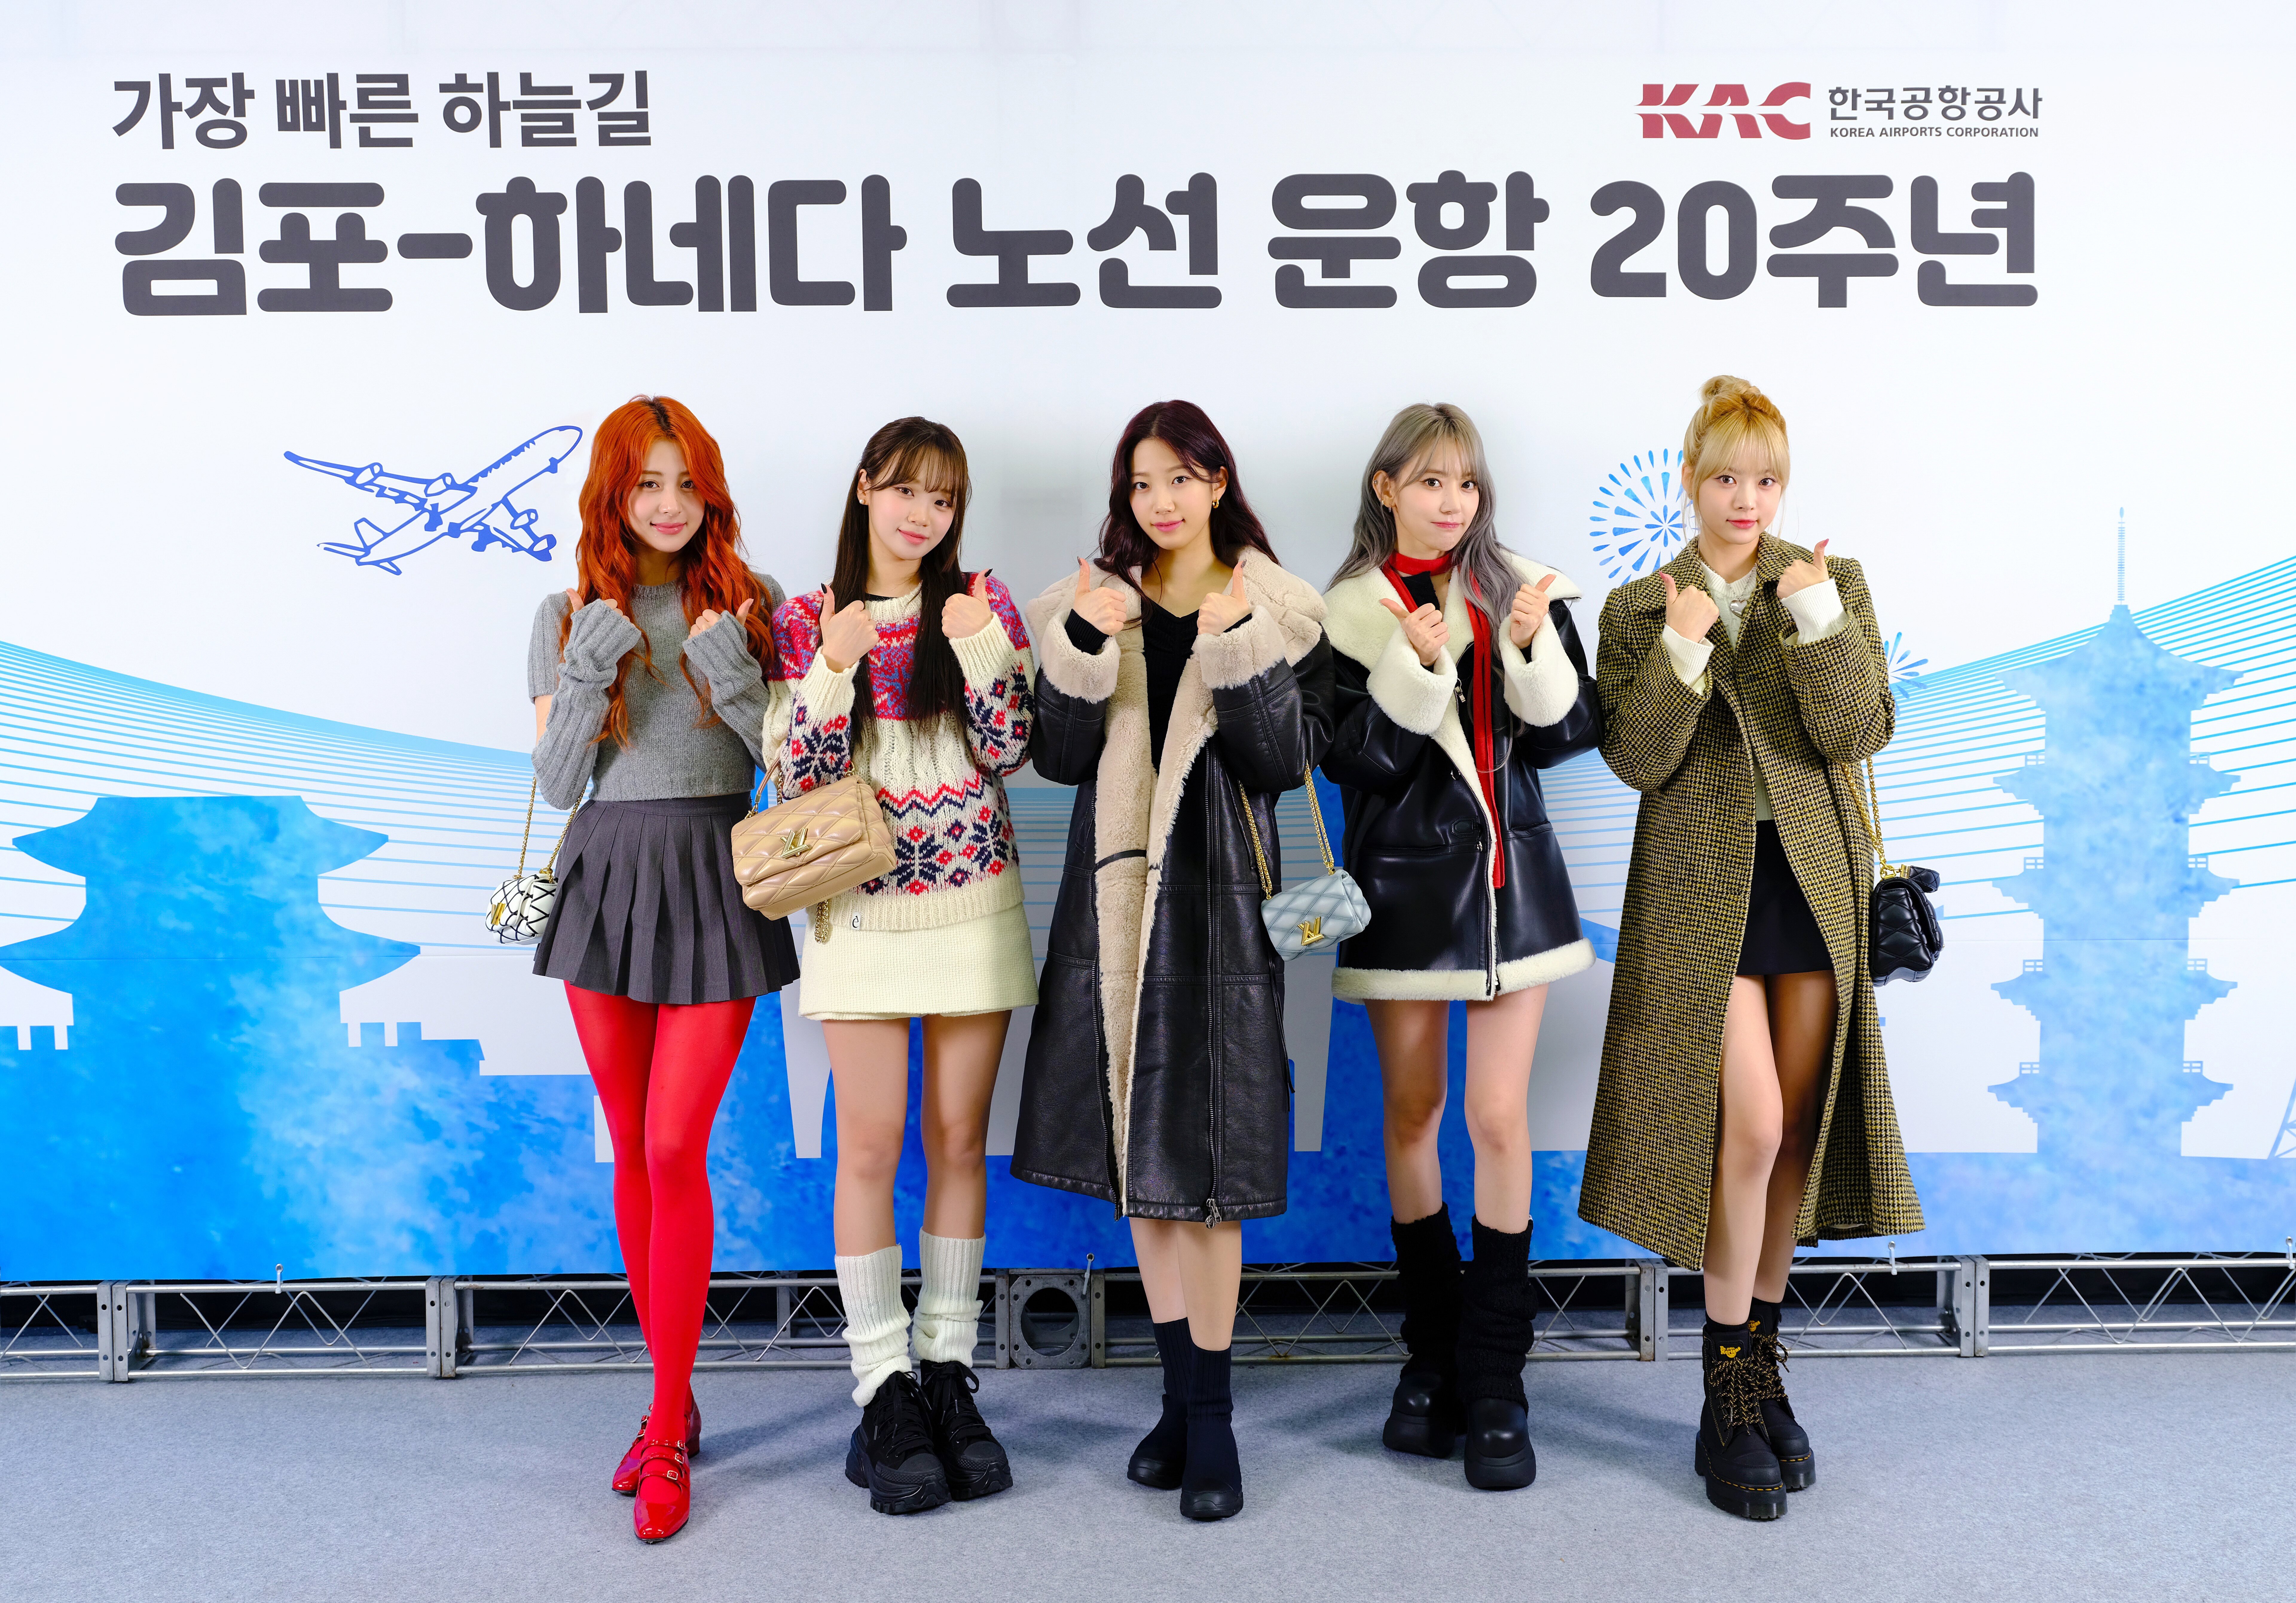 231229 - Korea Airports Corporation Naver Blog Update with LE 